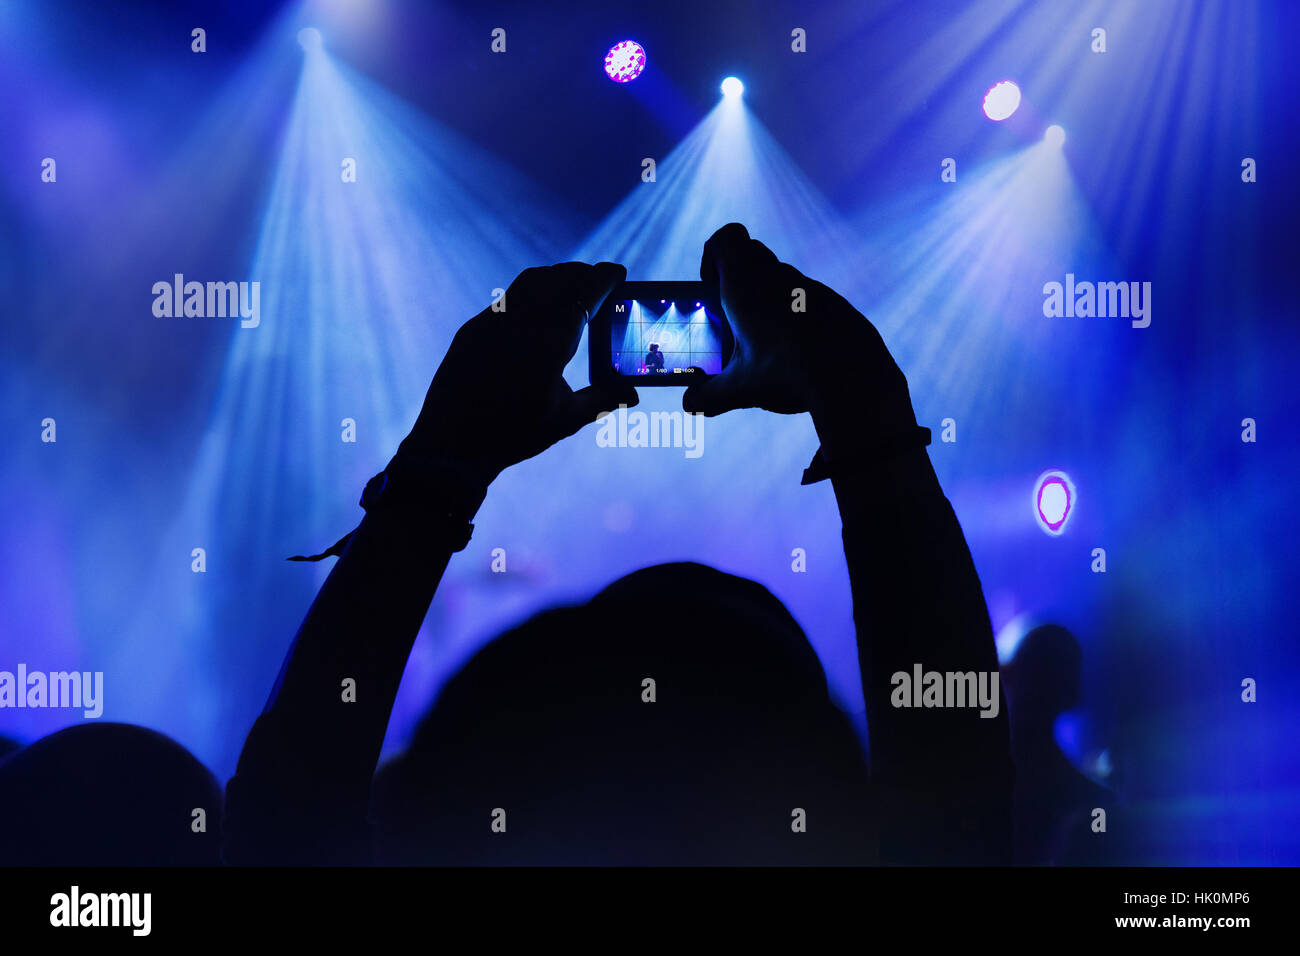 Person capturing a photo on a camera at a music festival. Stock Photo